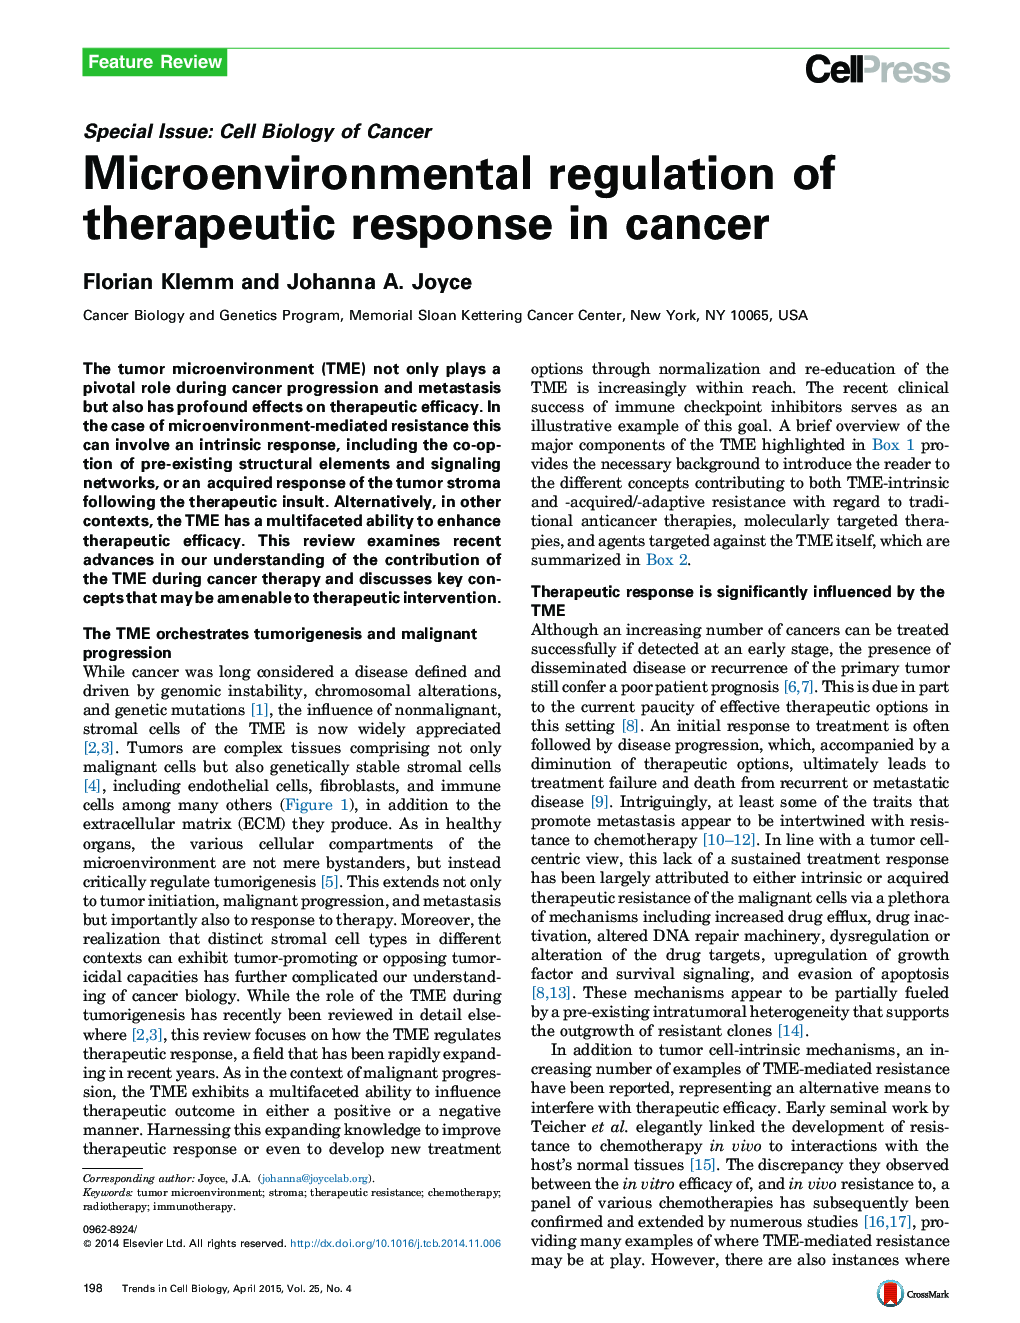 Microenvironmental regulation of therapeutic response in cancer